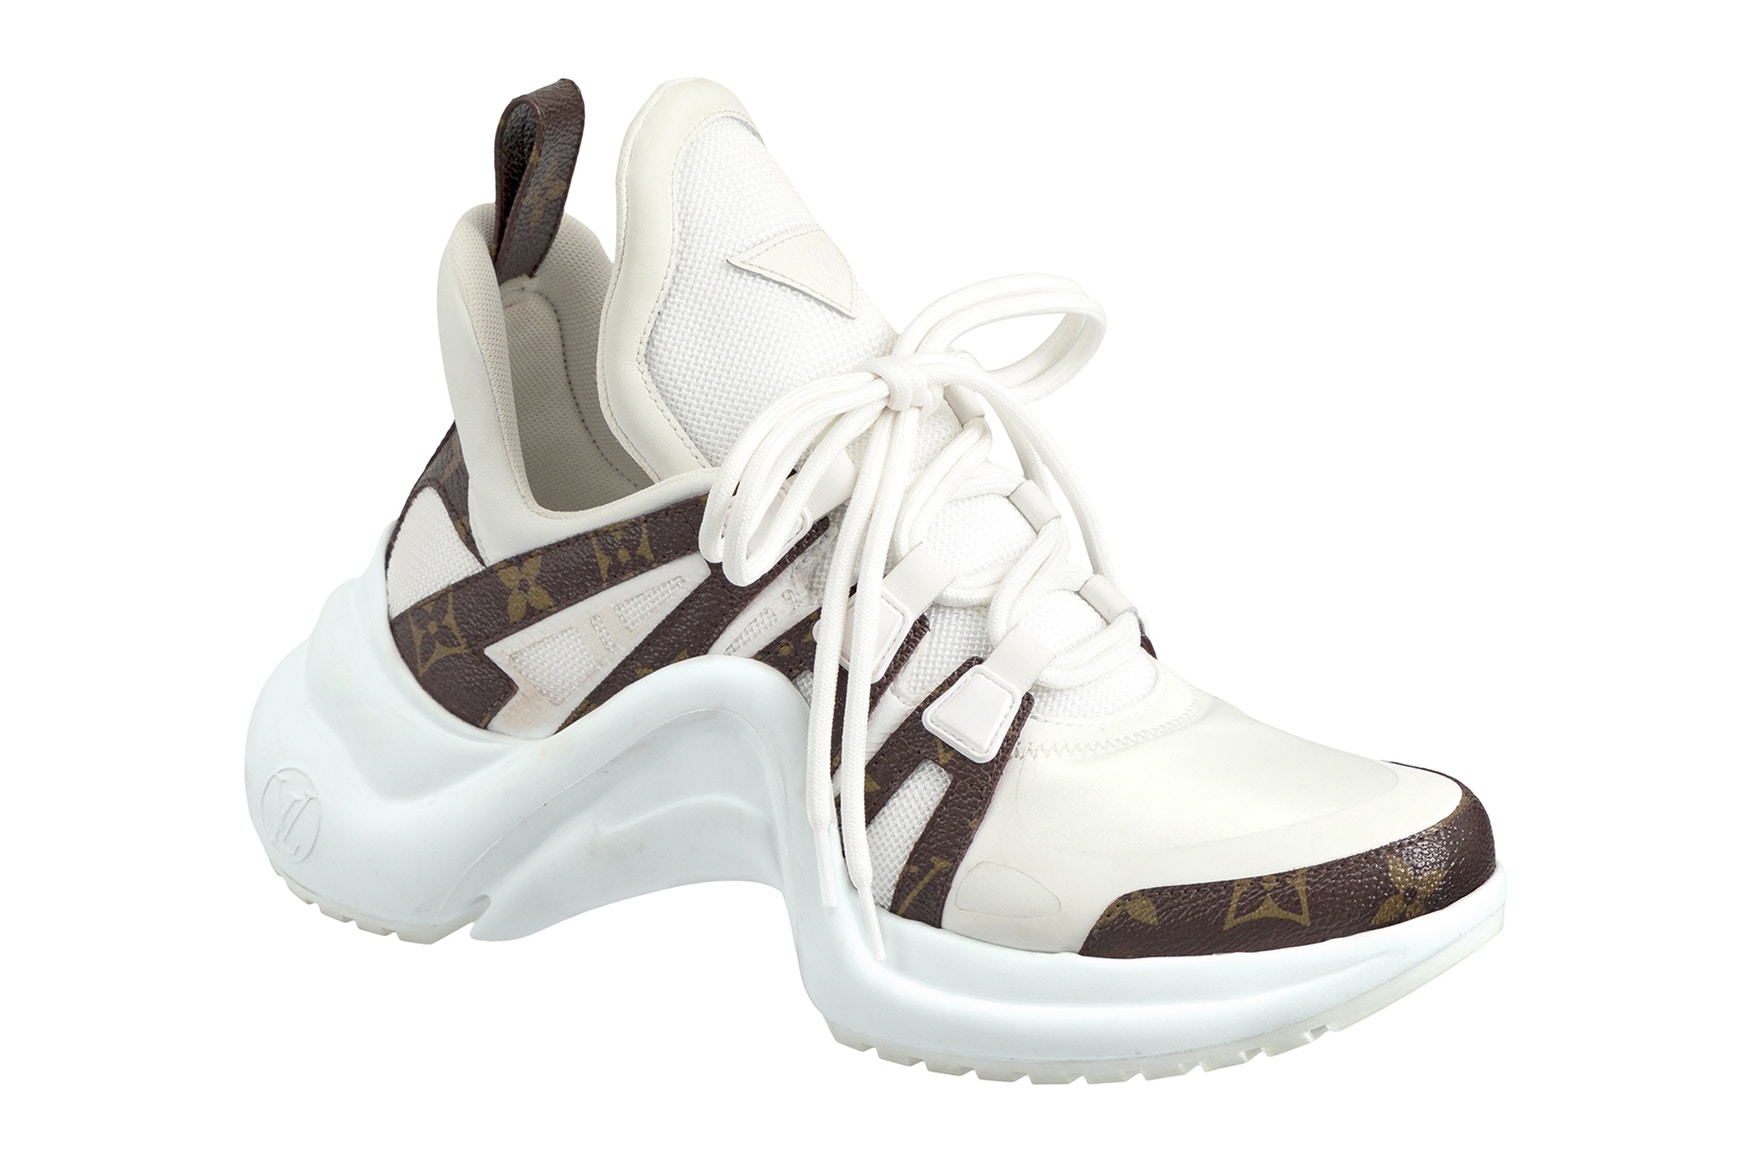 Here’s a Better View of Louis Vuitton’s Archlight Sneaker